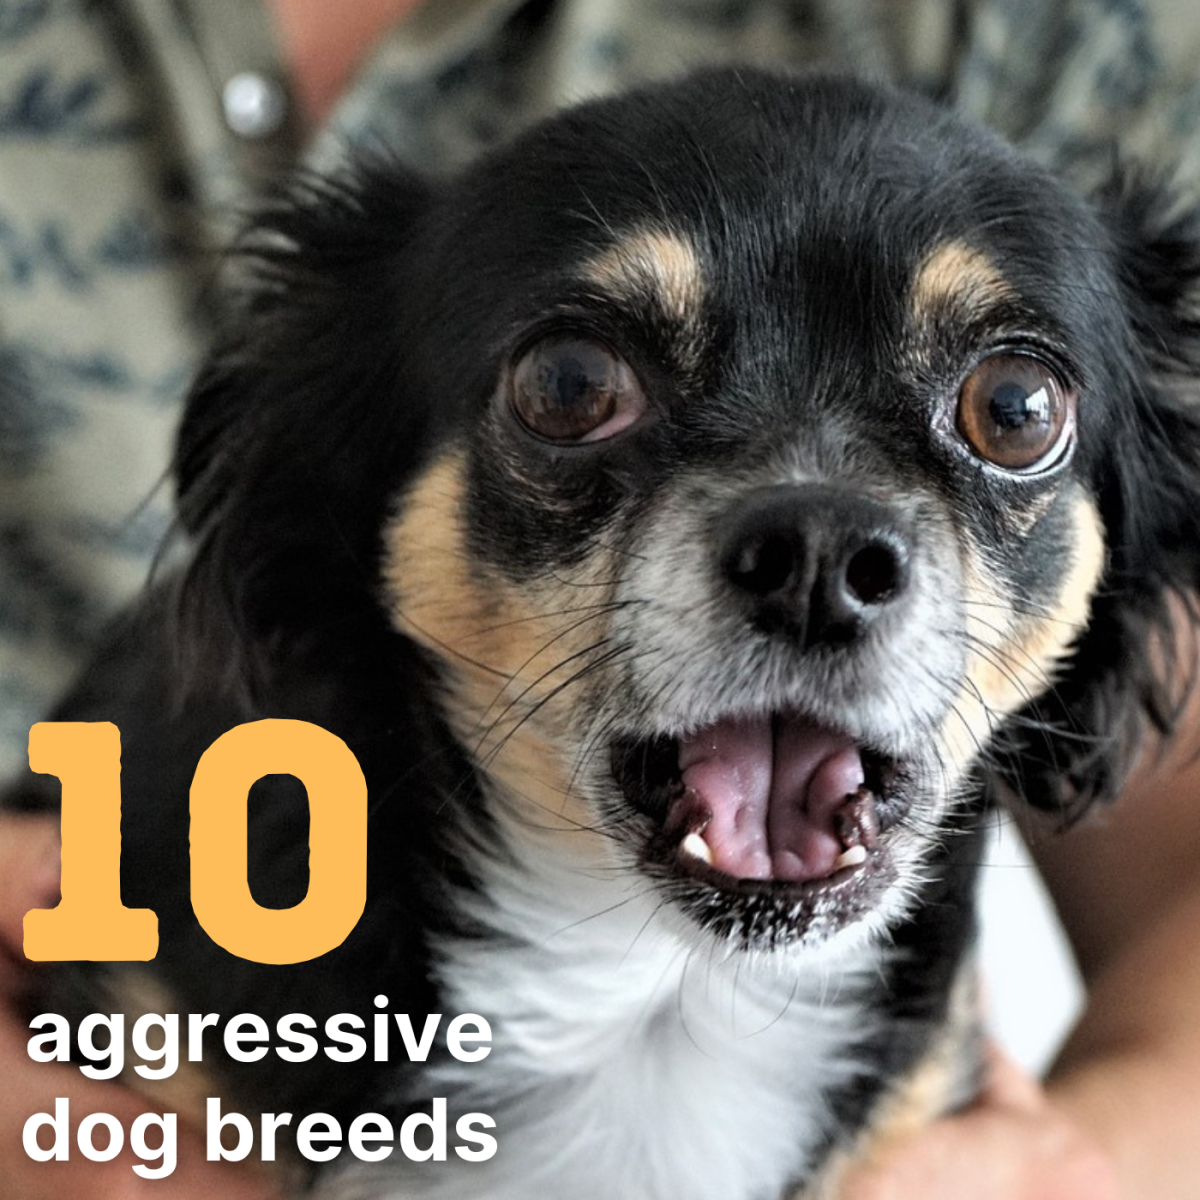 What are the 10 most aggressive dog breeds?